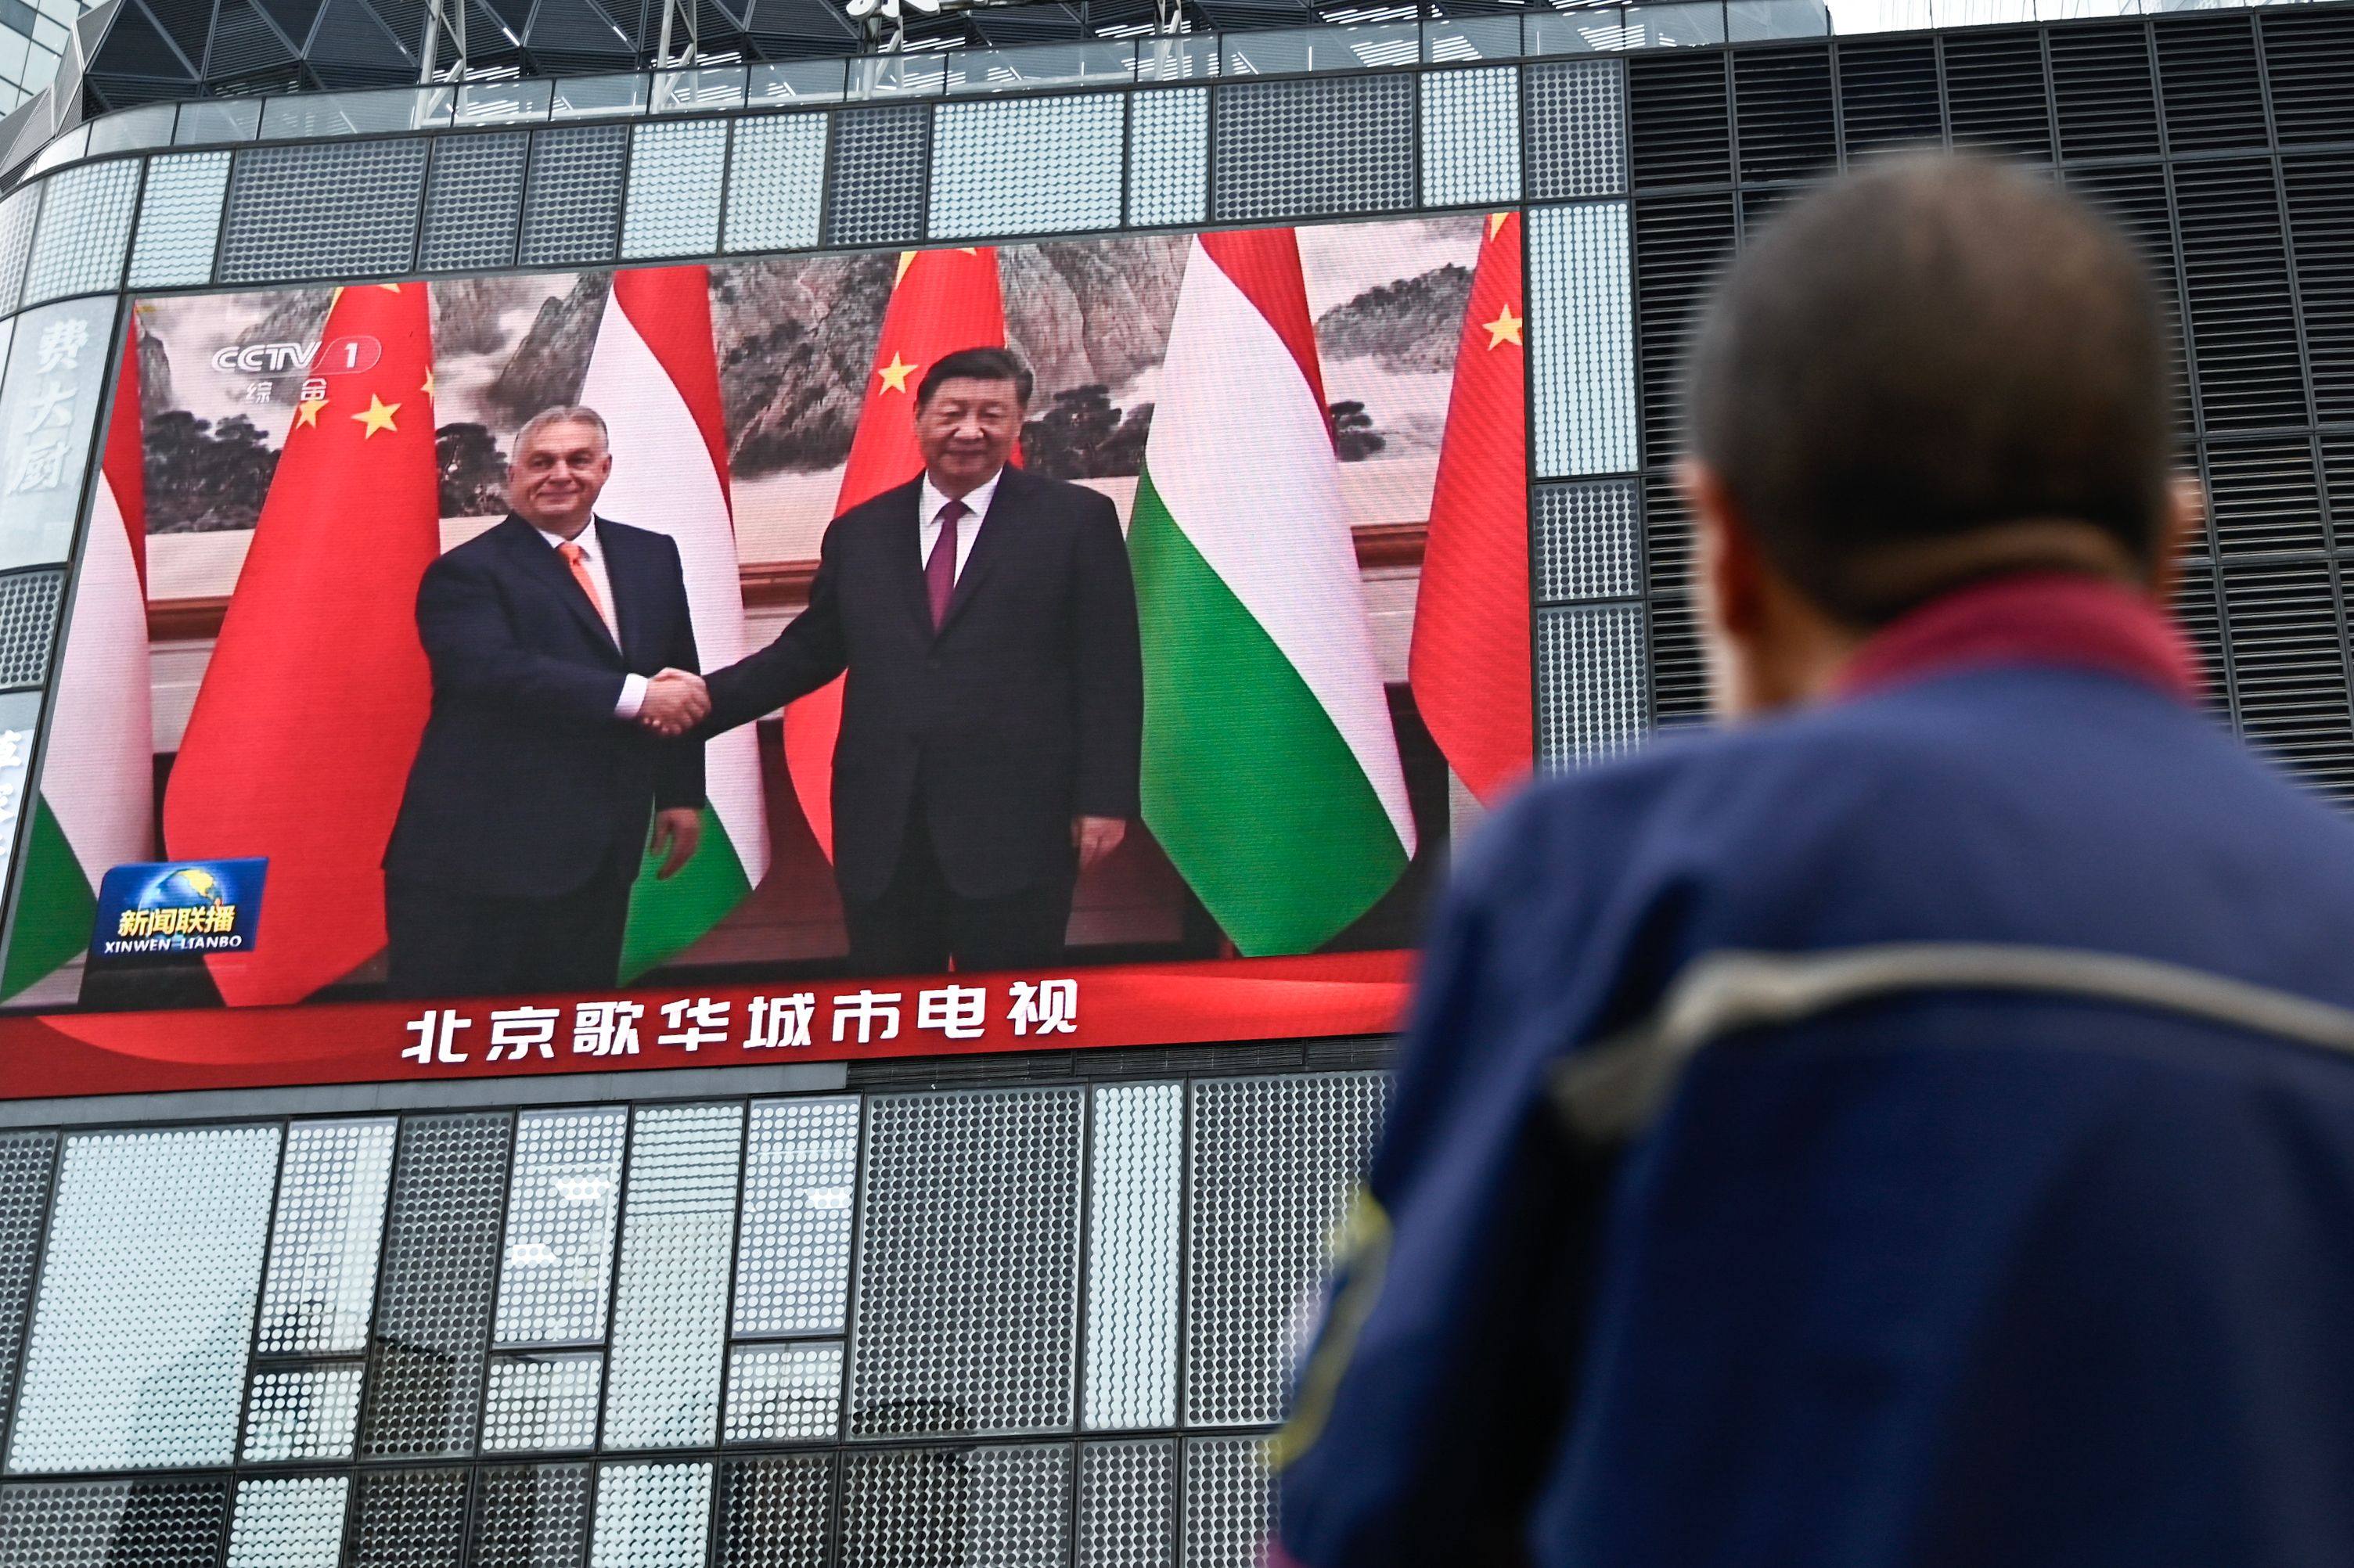 A man watches a large screen showing news coverage of China’s President Xi Jinping meeting Hungary’s Prime Minister Viktor Orban in Beijing on July 8, 2024. Photo: AFP